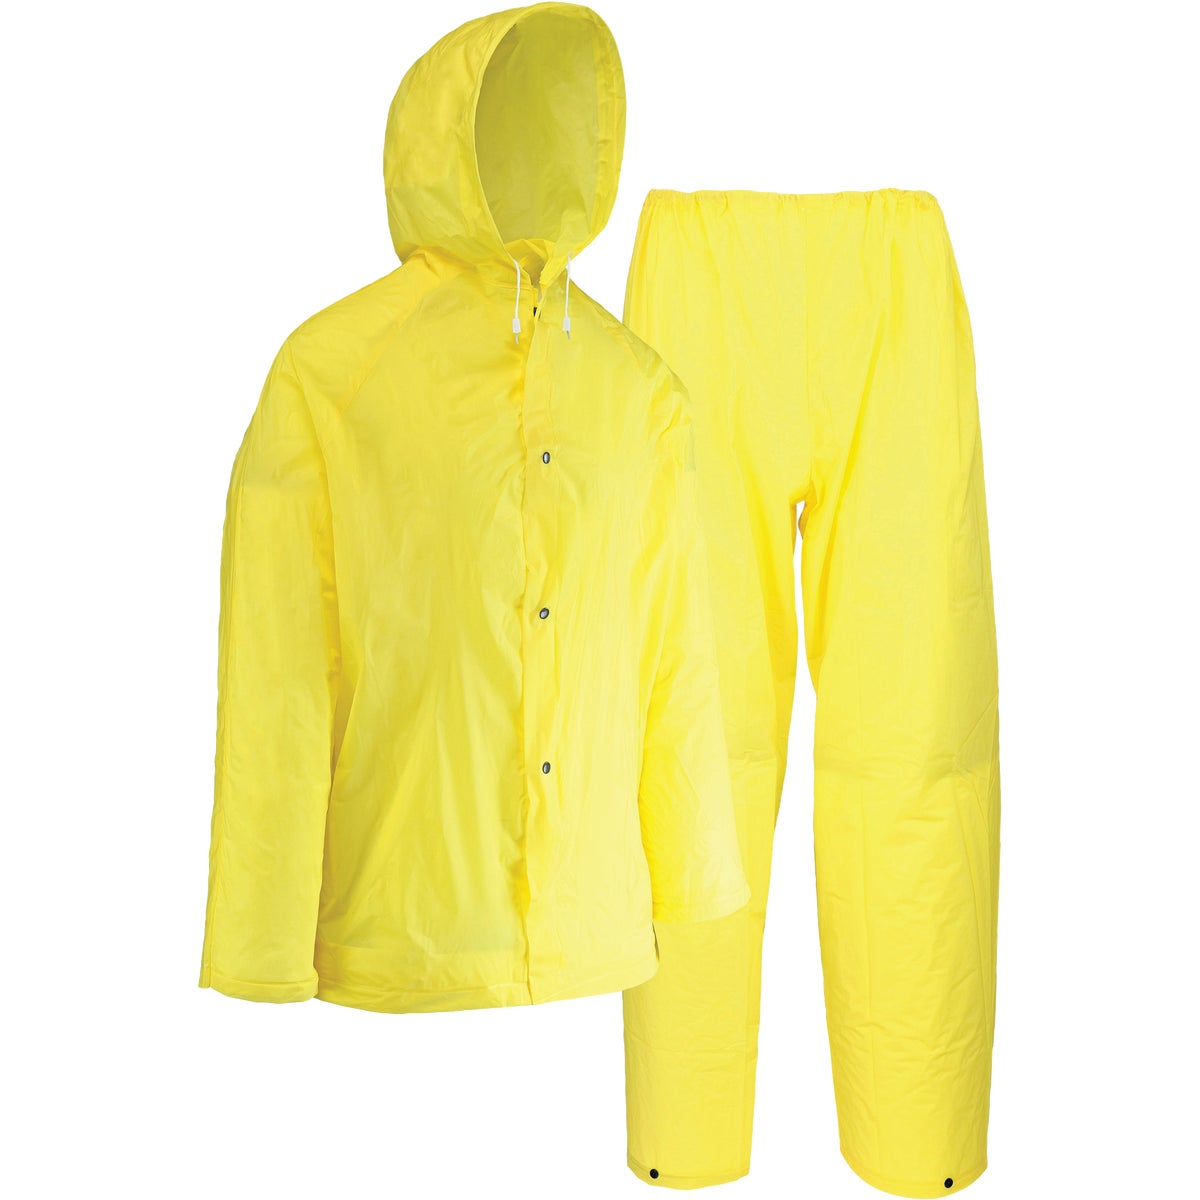 West Chester Protective Gear 44110/XL West Chester Protective Gear XL 2-Piece Yellow EVA Rain Suit 44110/XL